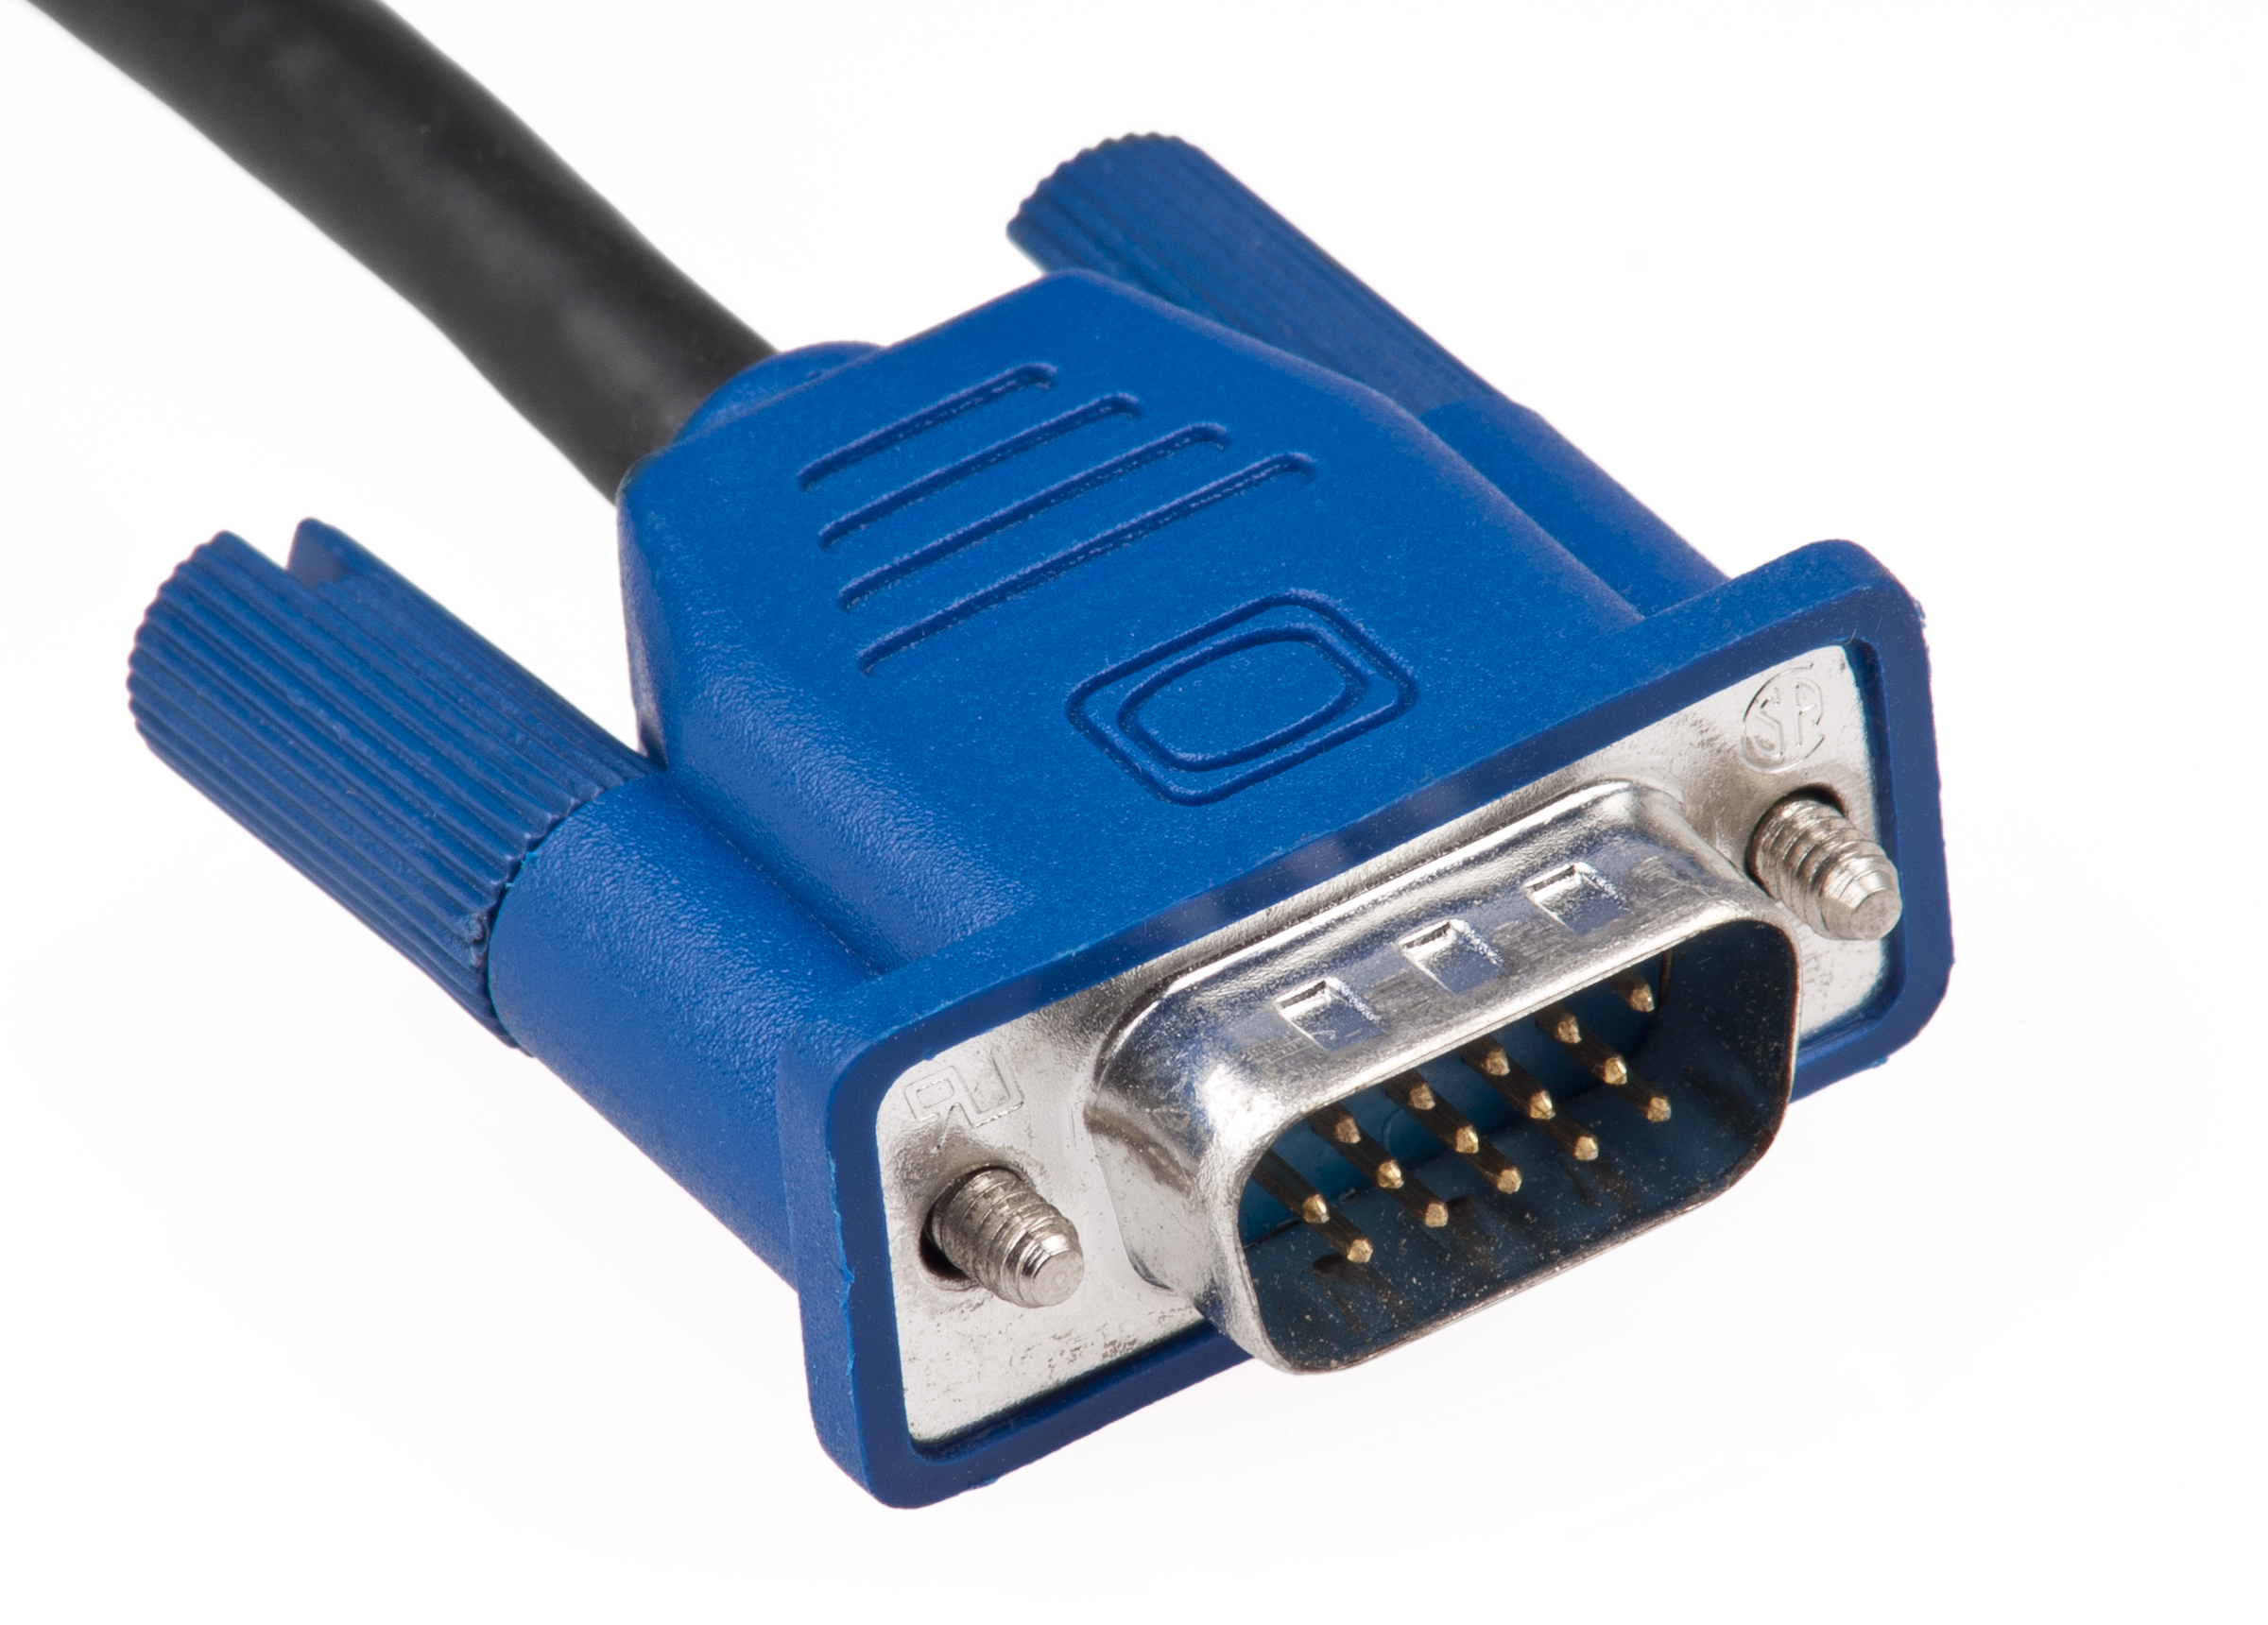 Monitor connections explained – Single and dual link DVI-D/A/I, VGA ...